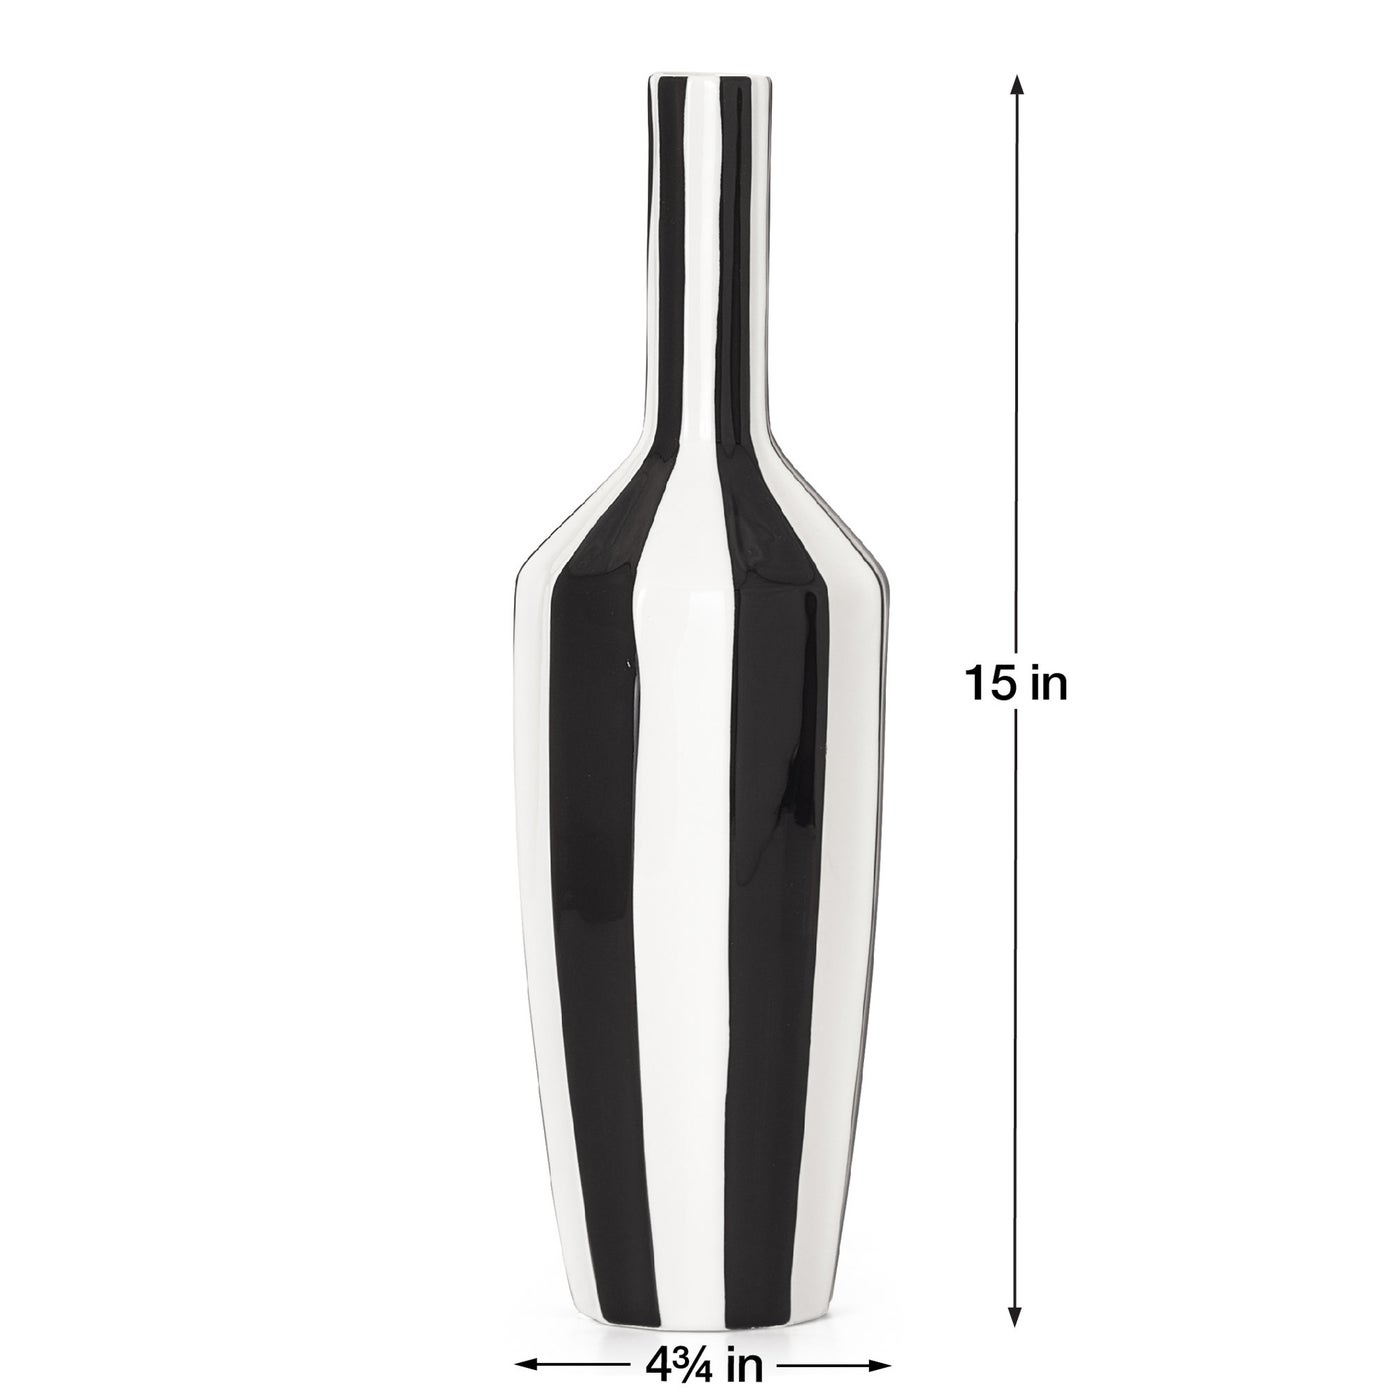 Abstract Black And White Stripped Ceramic Vase